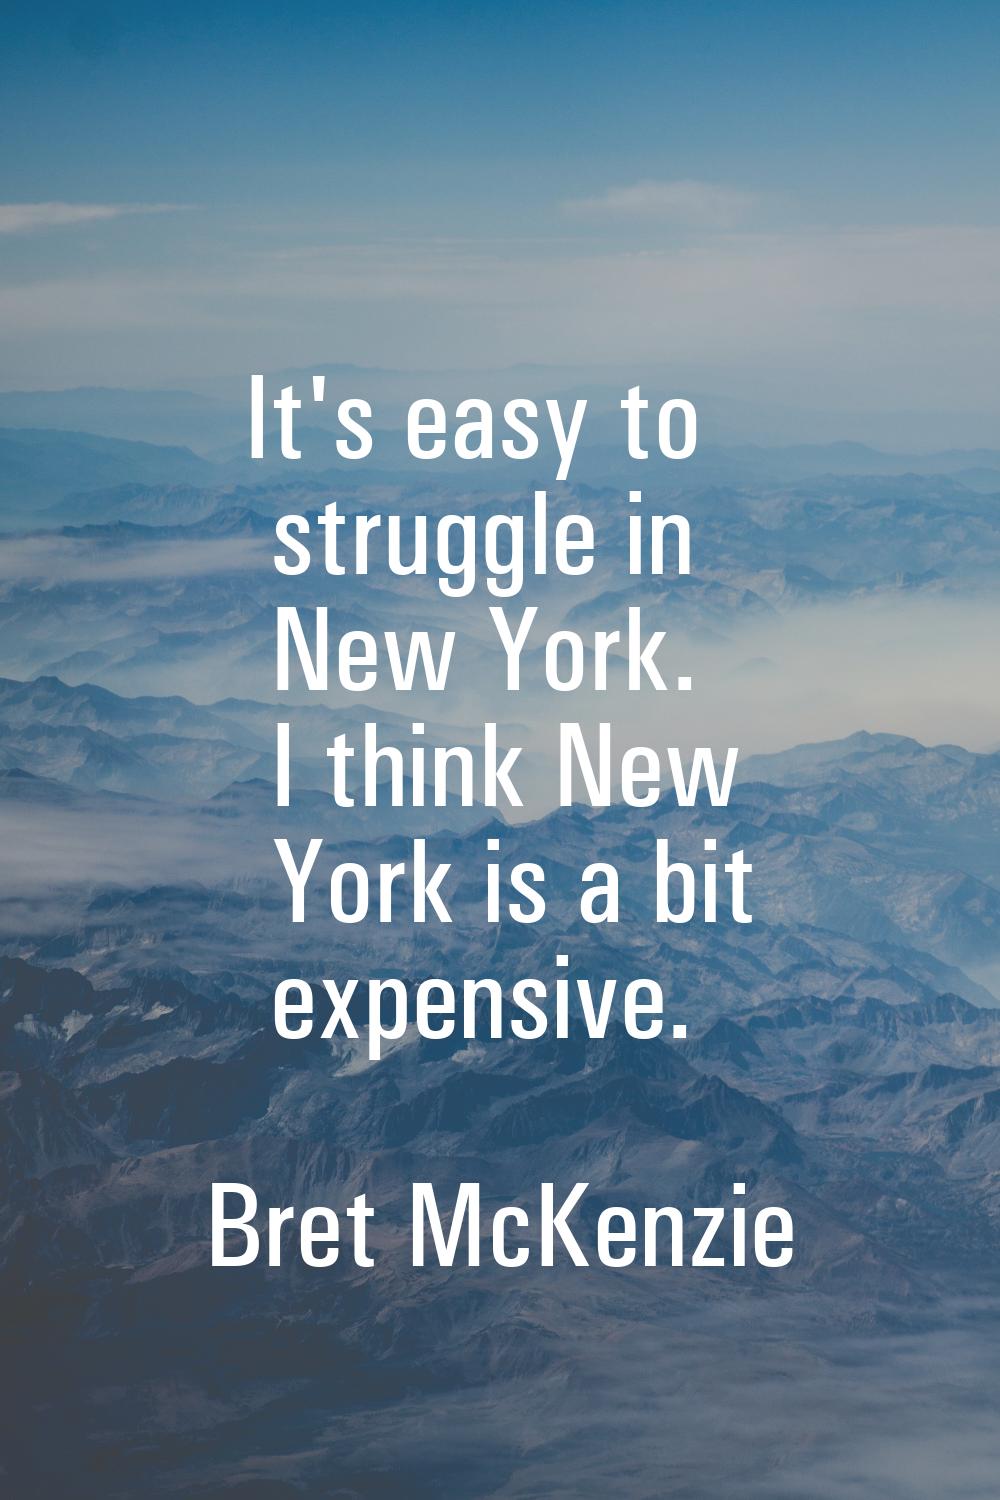 It's easy to struggle in New York. I think New York is a bit expensive.